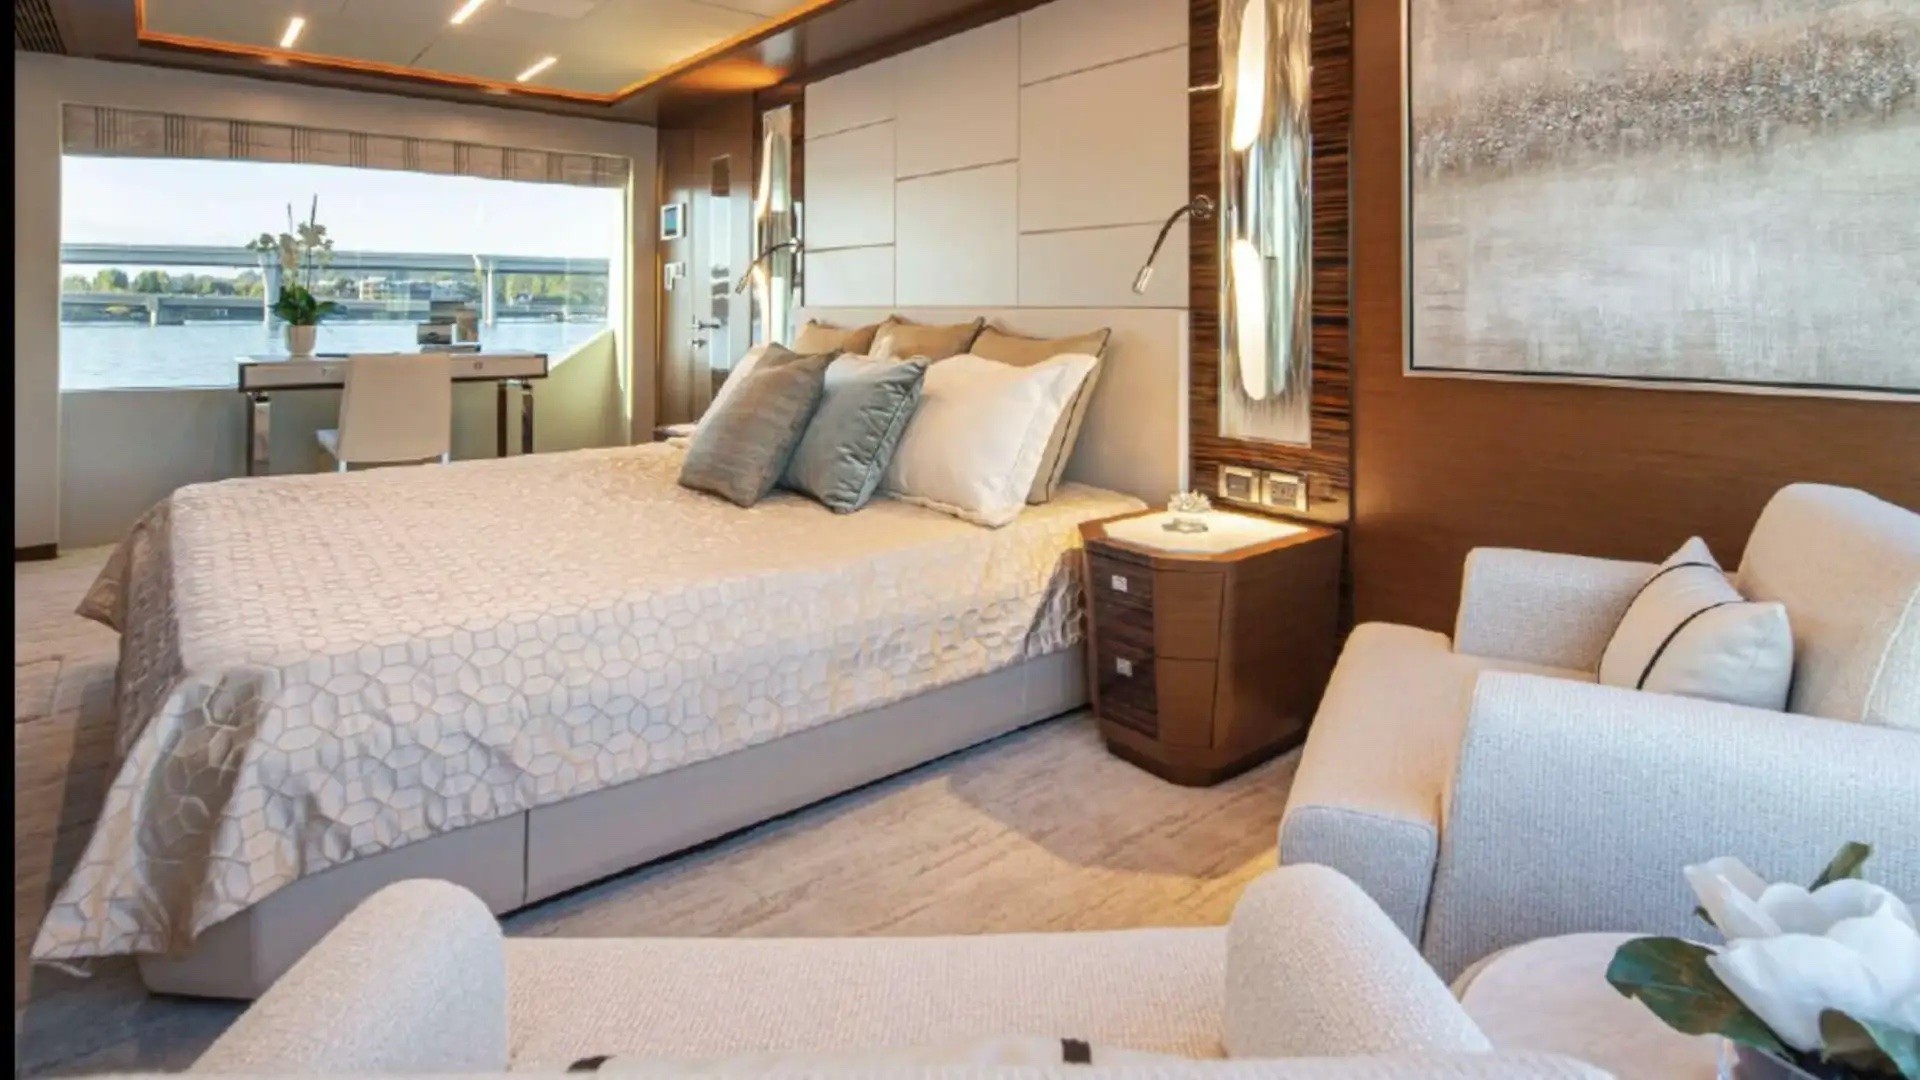 the golden standard for comfort and peace can be found in the 8 million tlc yacht 5